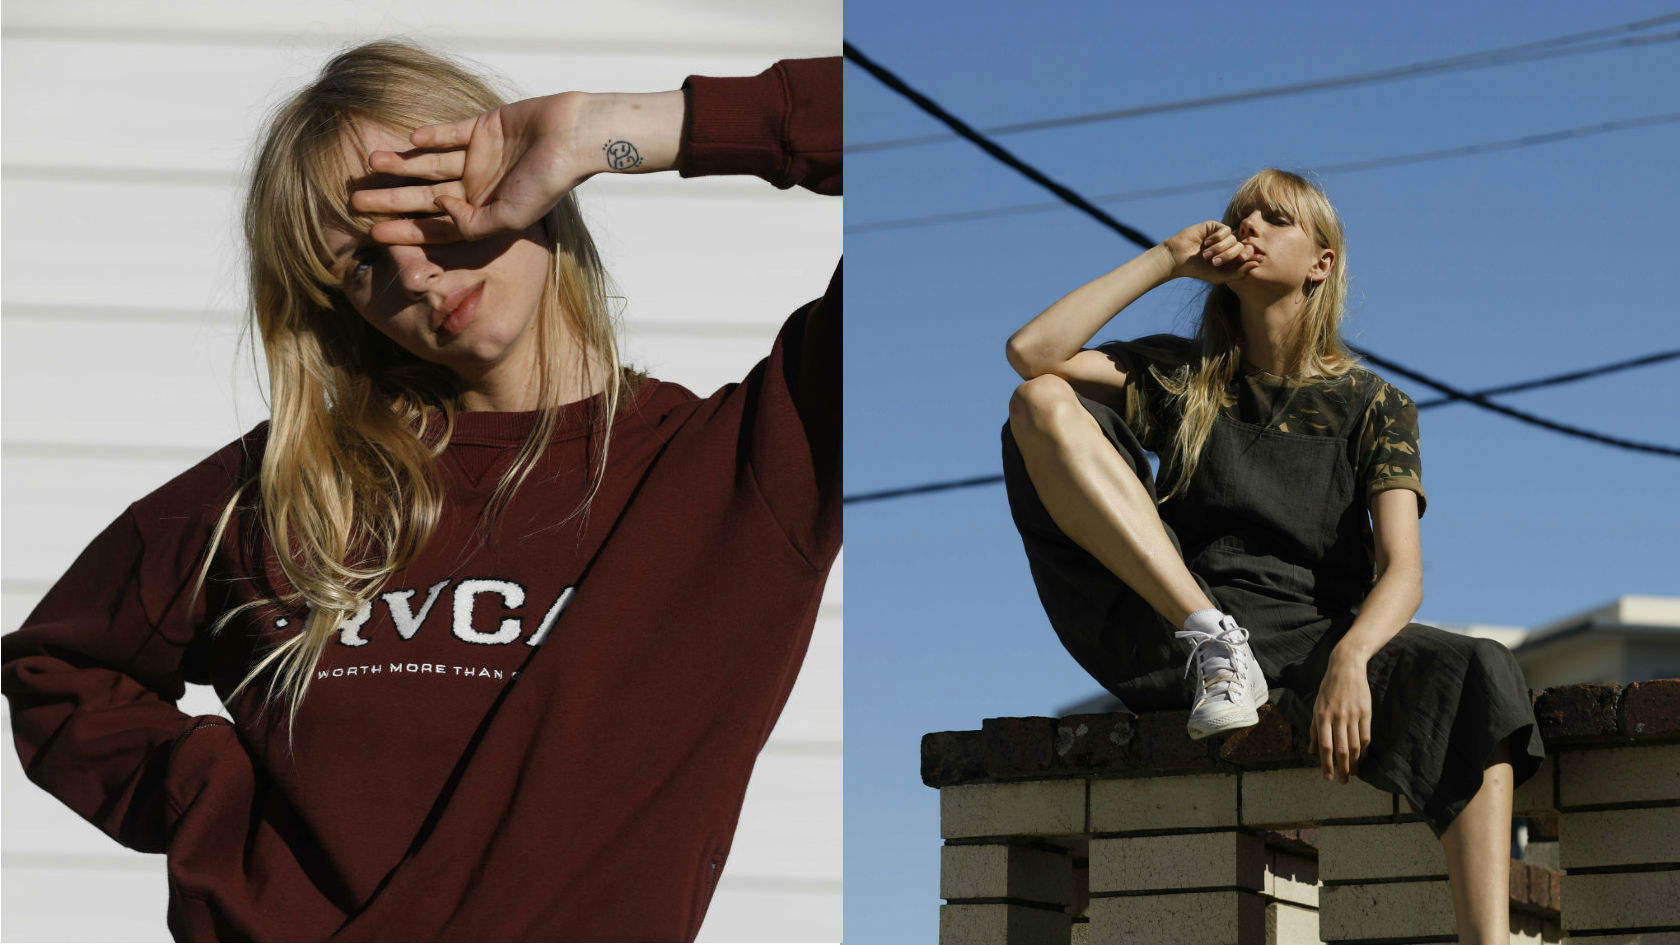 Rvca Reveals Its Aw18 Women S Collection For The Colder Months Lifewithoutandy